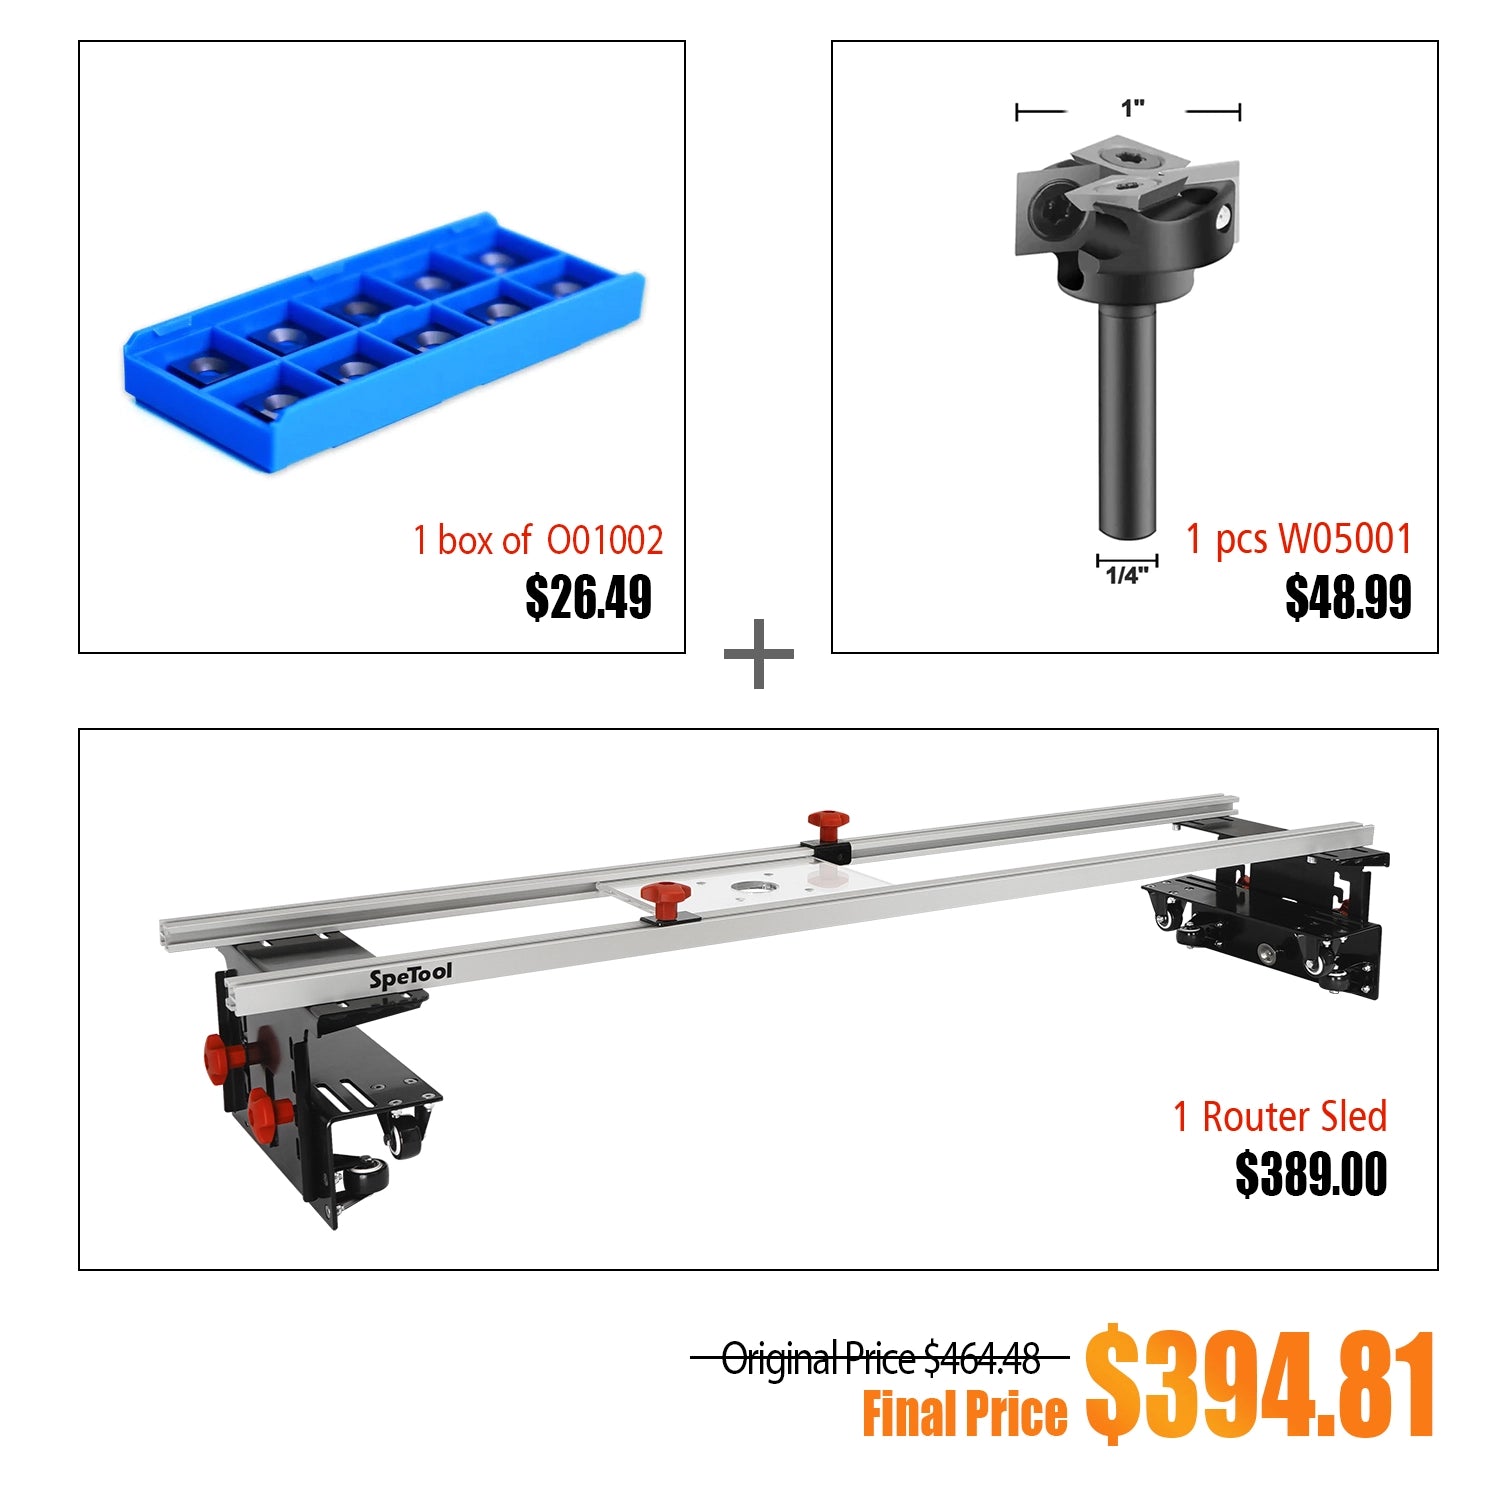 !!!【Pre-ordering】Bundle buying Save Up To $74 | SpeTool Cratos S01001 Machinist-Grade Router Sled & Spoilboard Surfacing Bits & Carbide Insert Kits